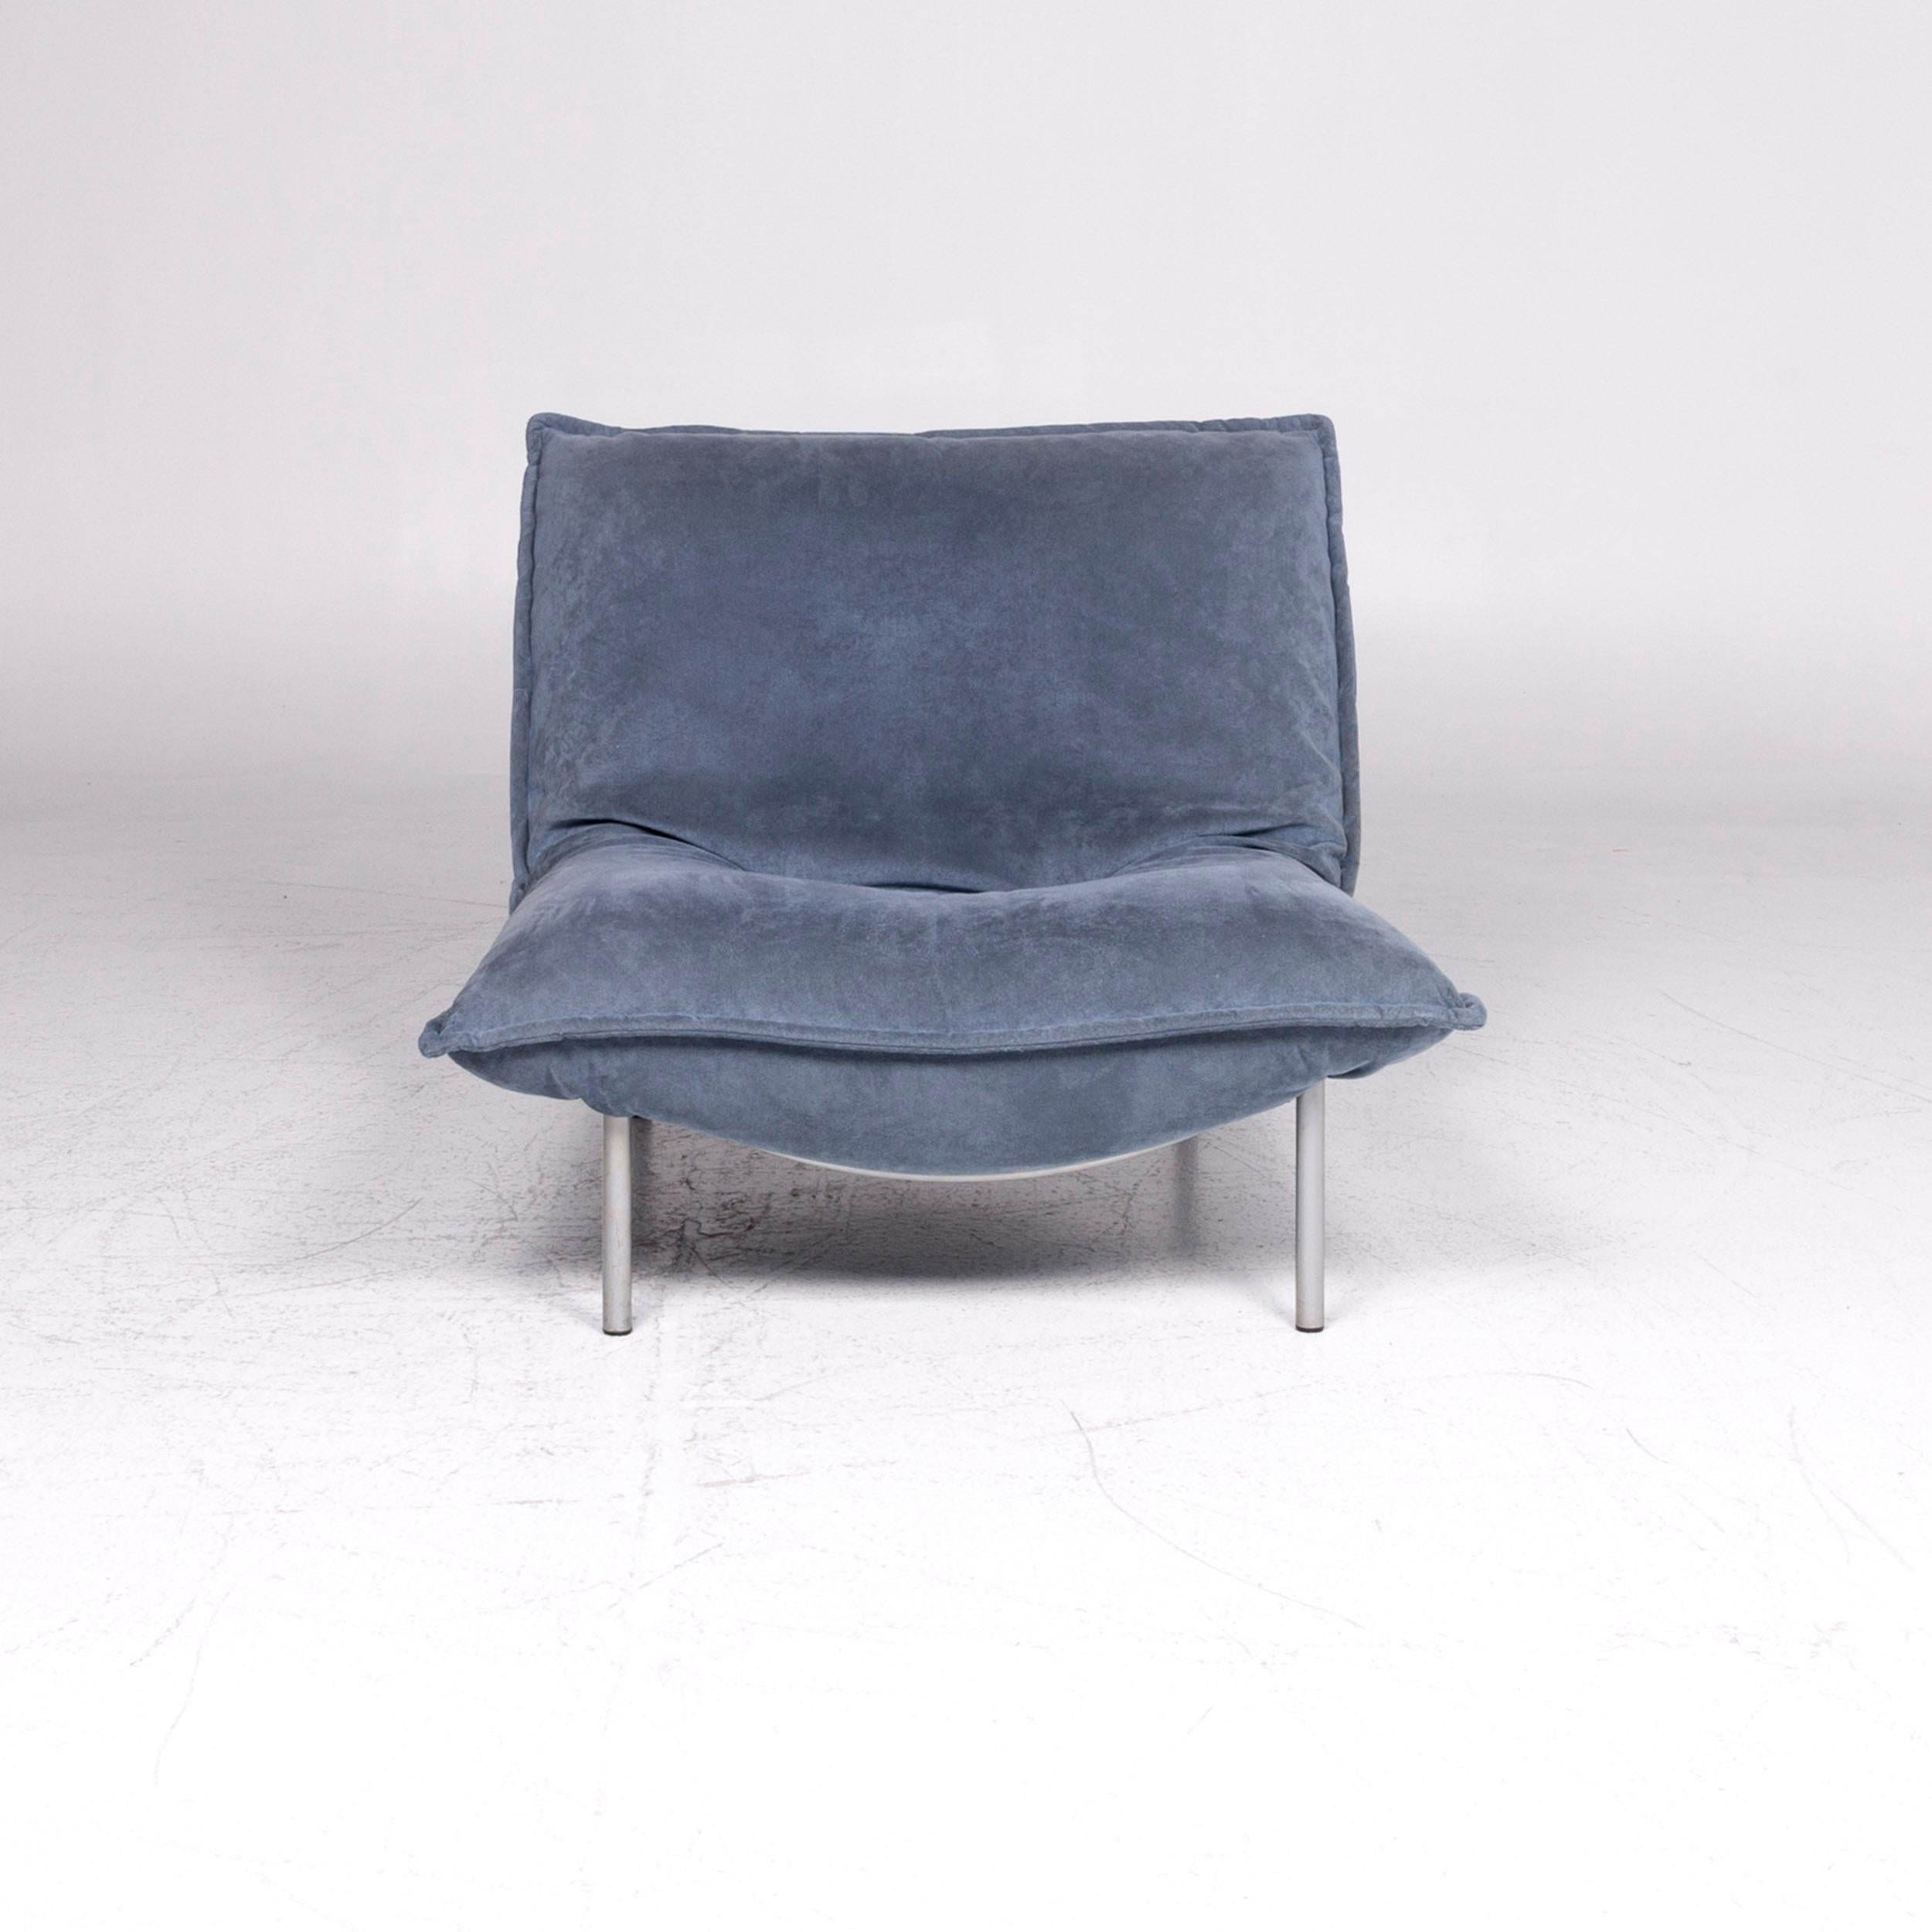 We bring to you a Ligne Roset Calin designer leather armchair blue relax function.
 
Product measurements in centimetres:
 
Depth 104
Width 83
Height 72
Seat-height 38
Seat-depth 60
Seat-width 83
Back-height 41.

  